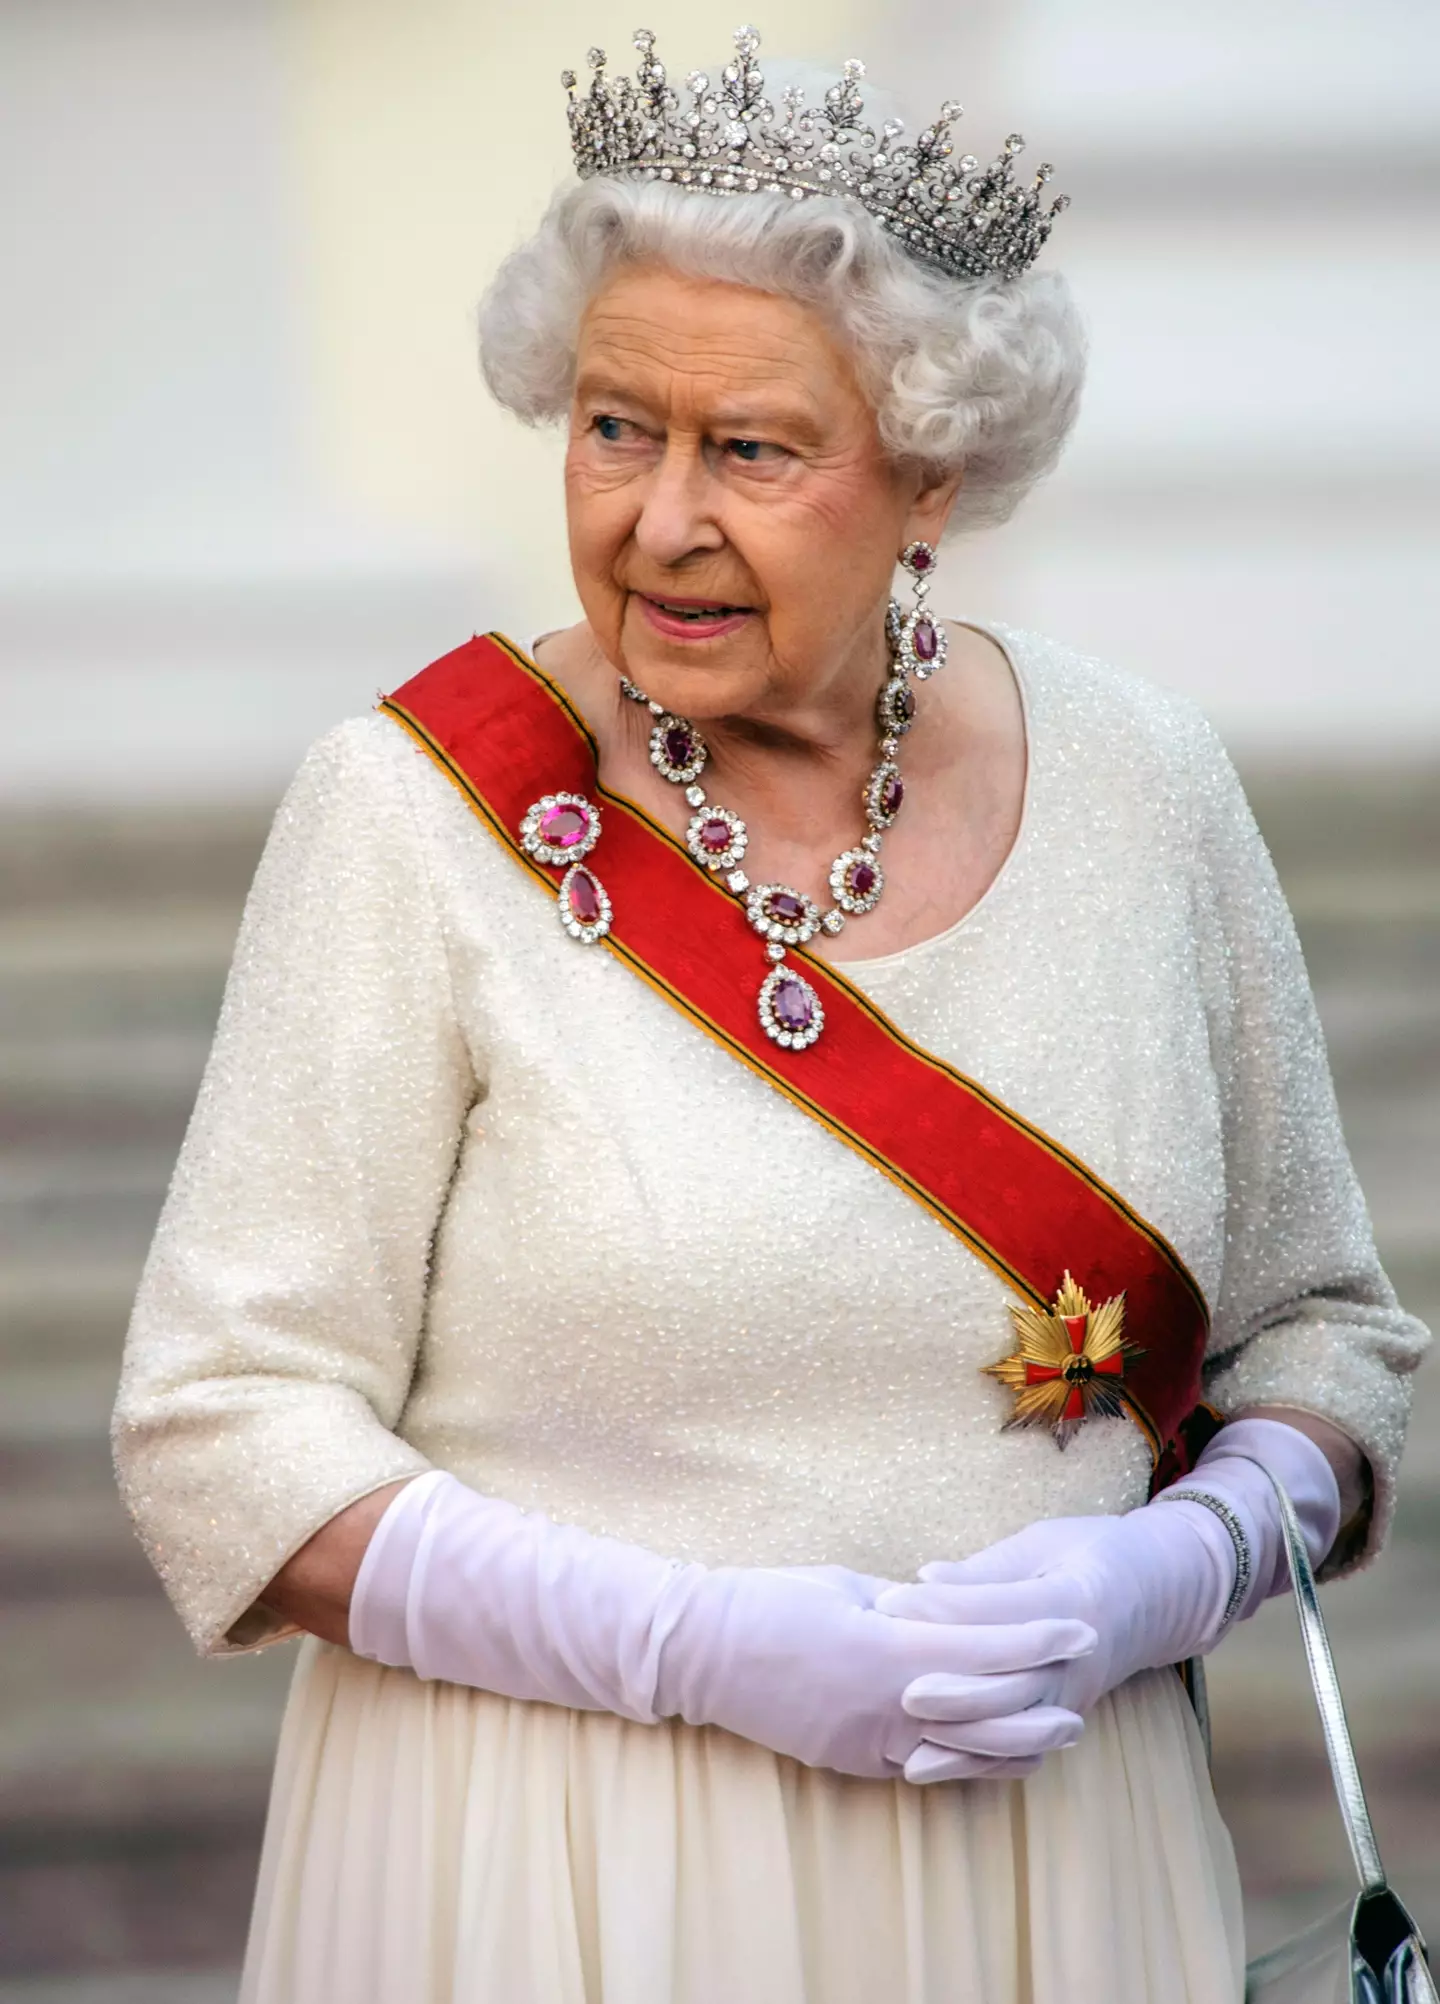 The Queen will mark her 70th year on the throne this year. (